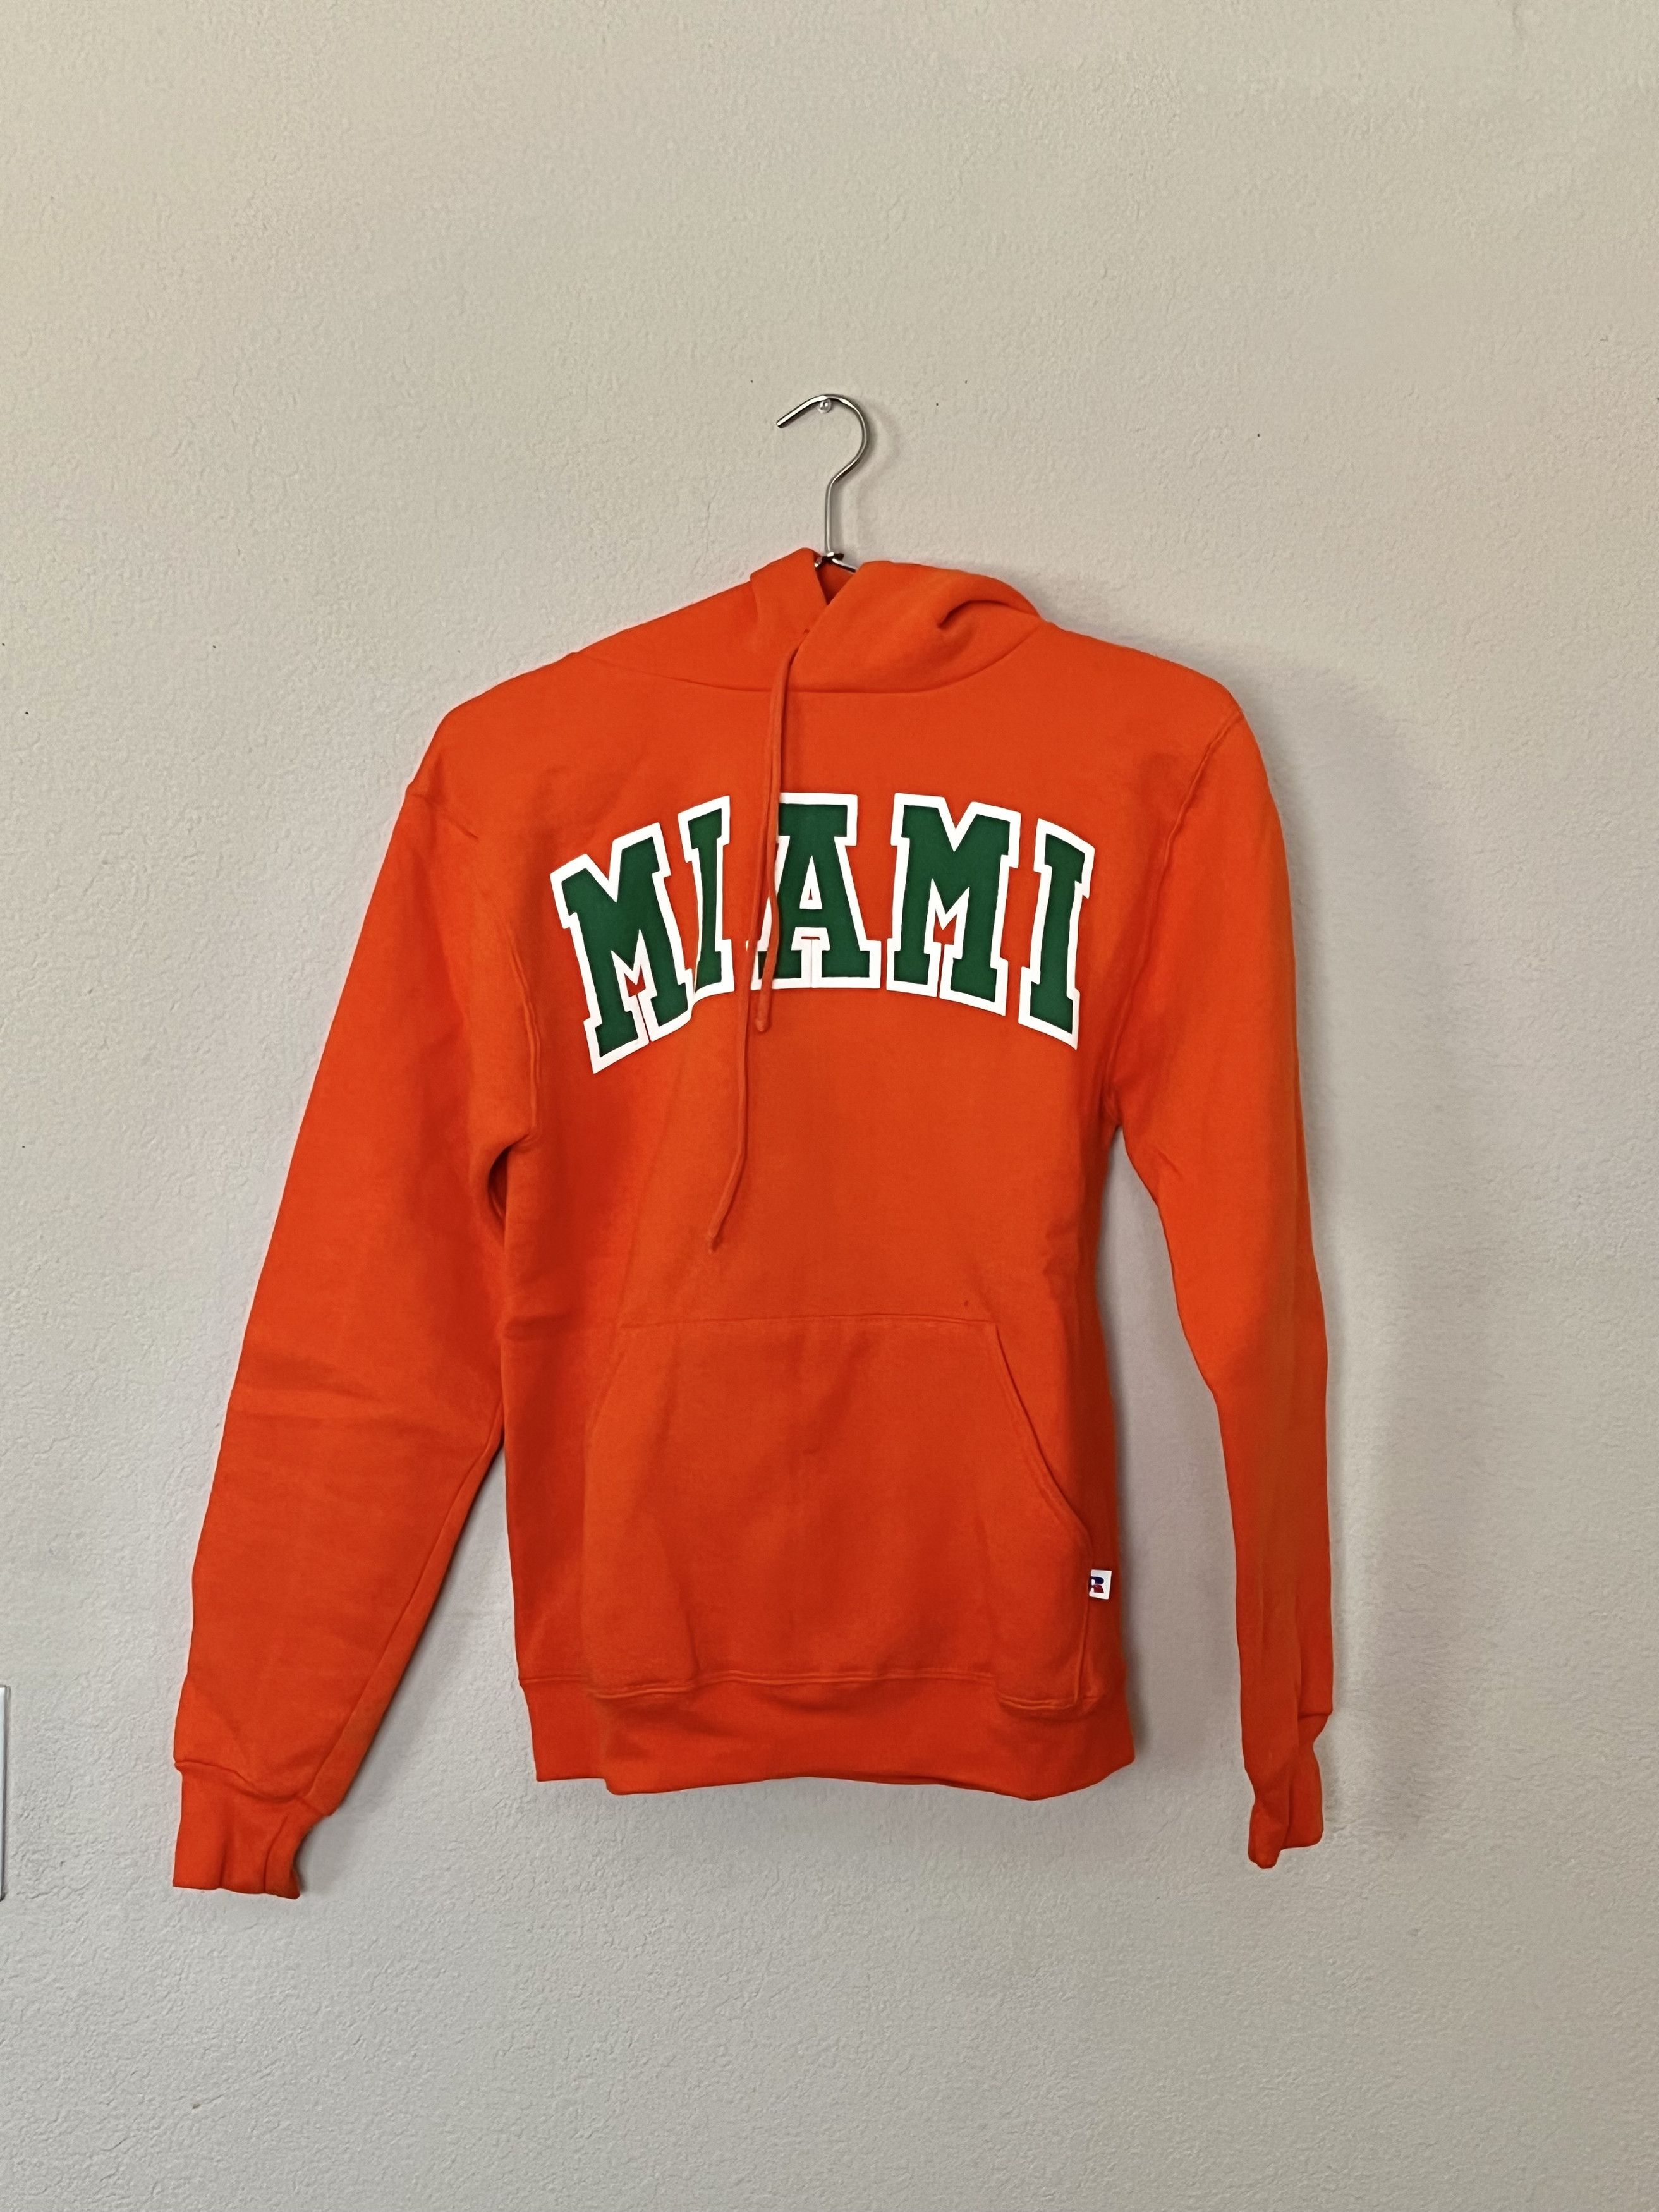 Russell Athletic Russell Athletic Miami hoodie | Grailed